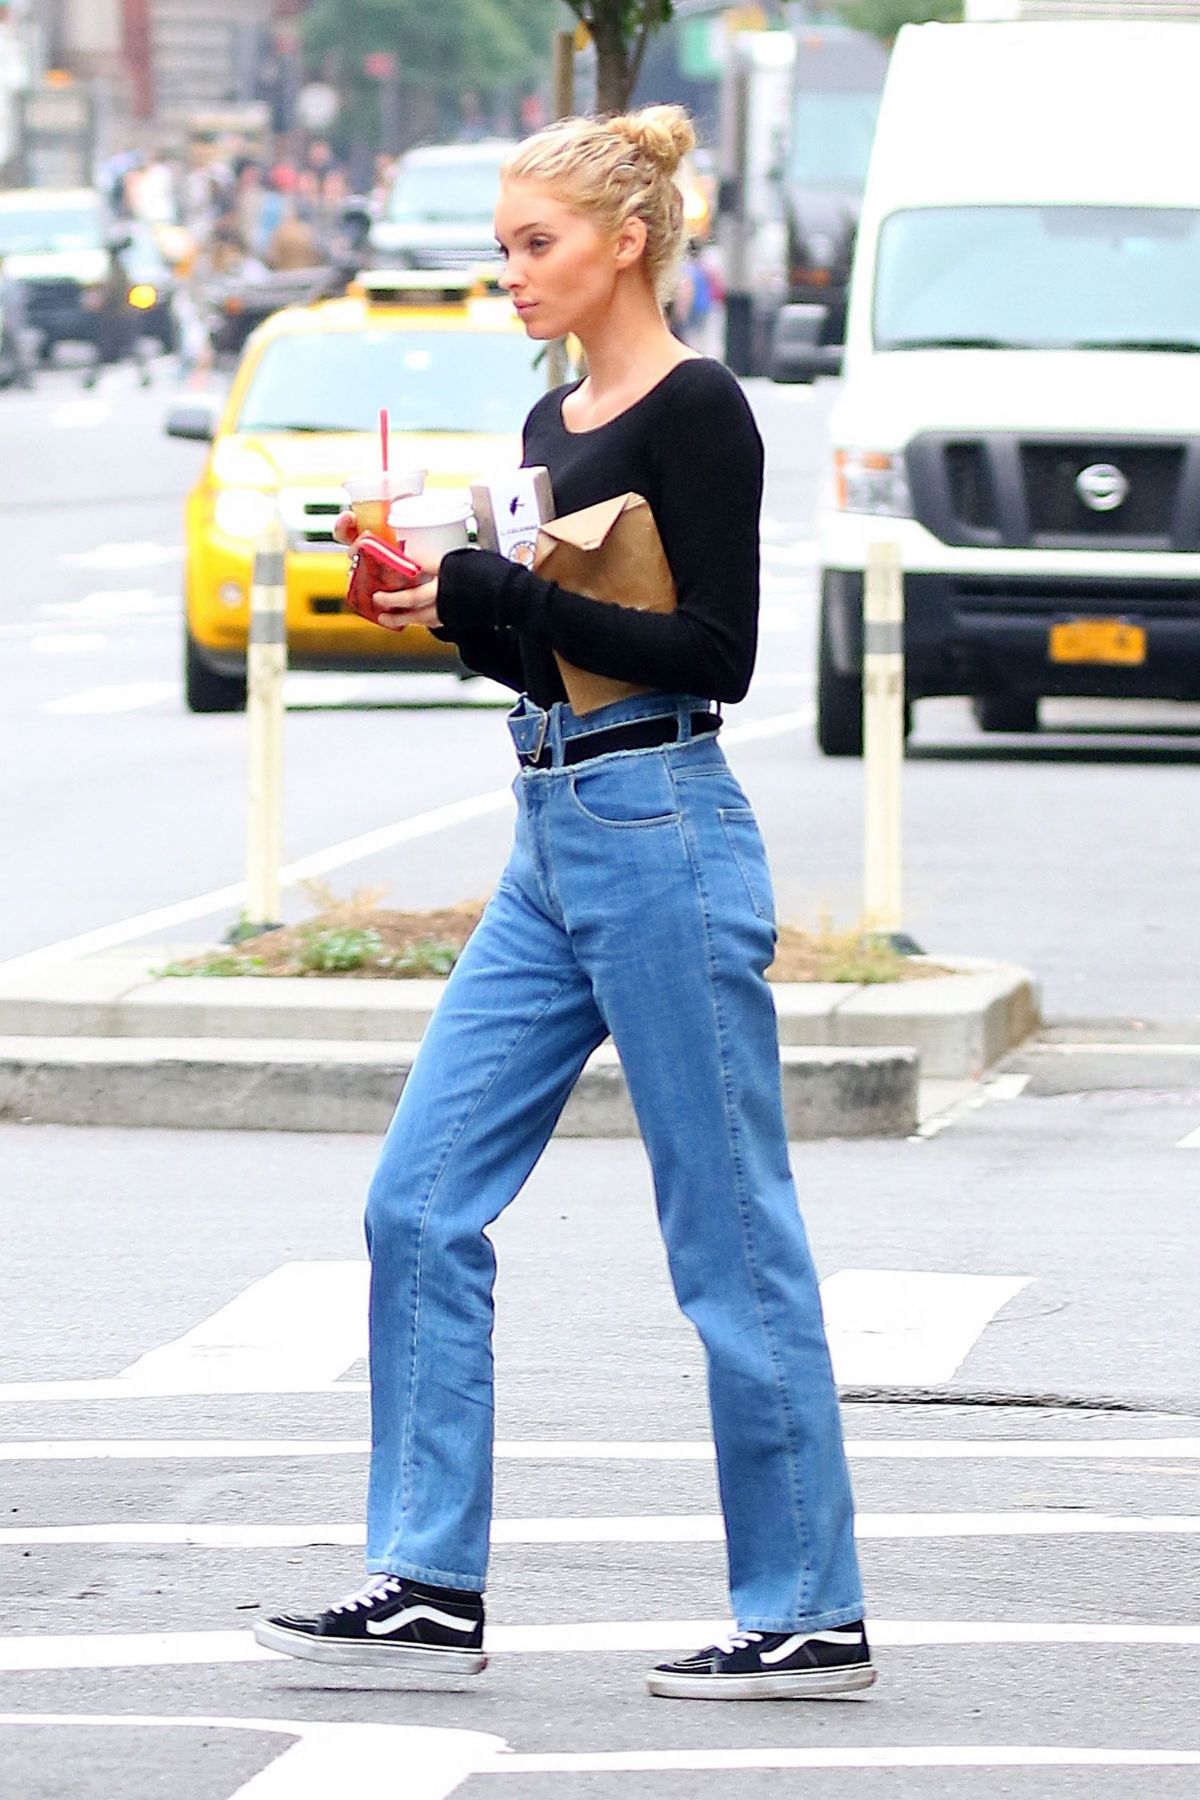 ELSA HOSK in Jeans Out in New York 06/16/2017 – HawtCelebs